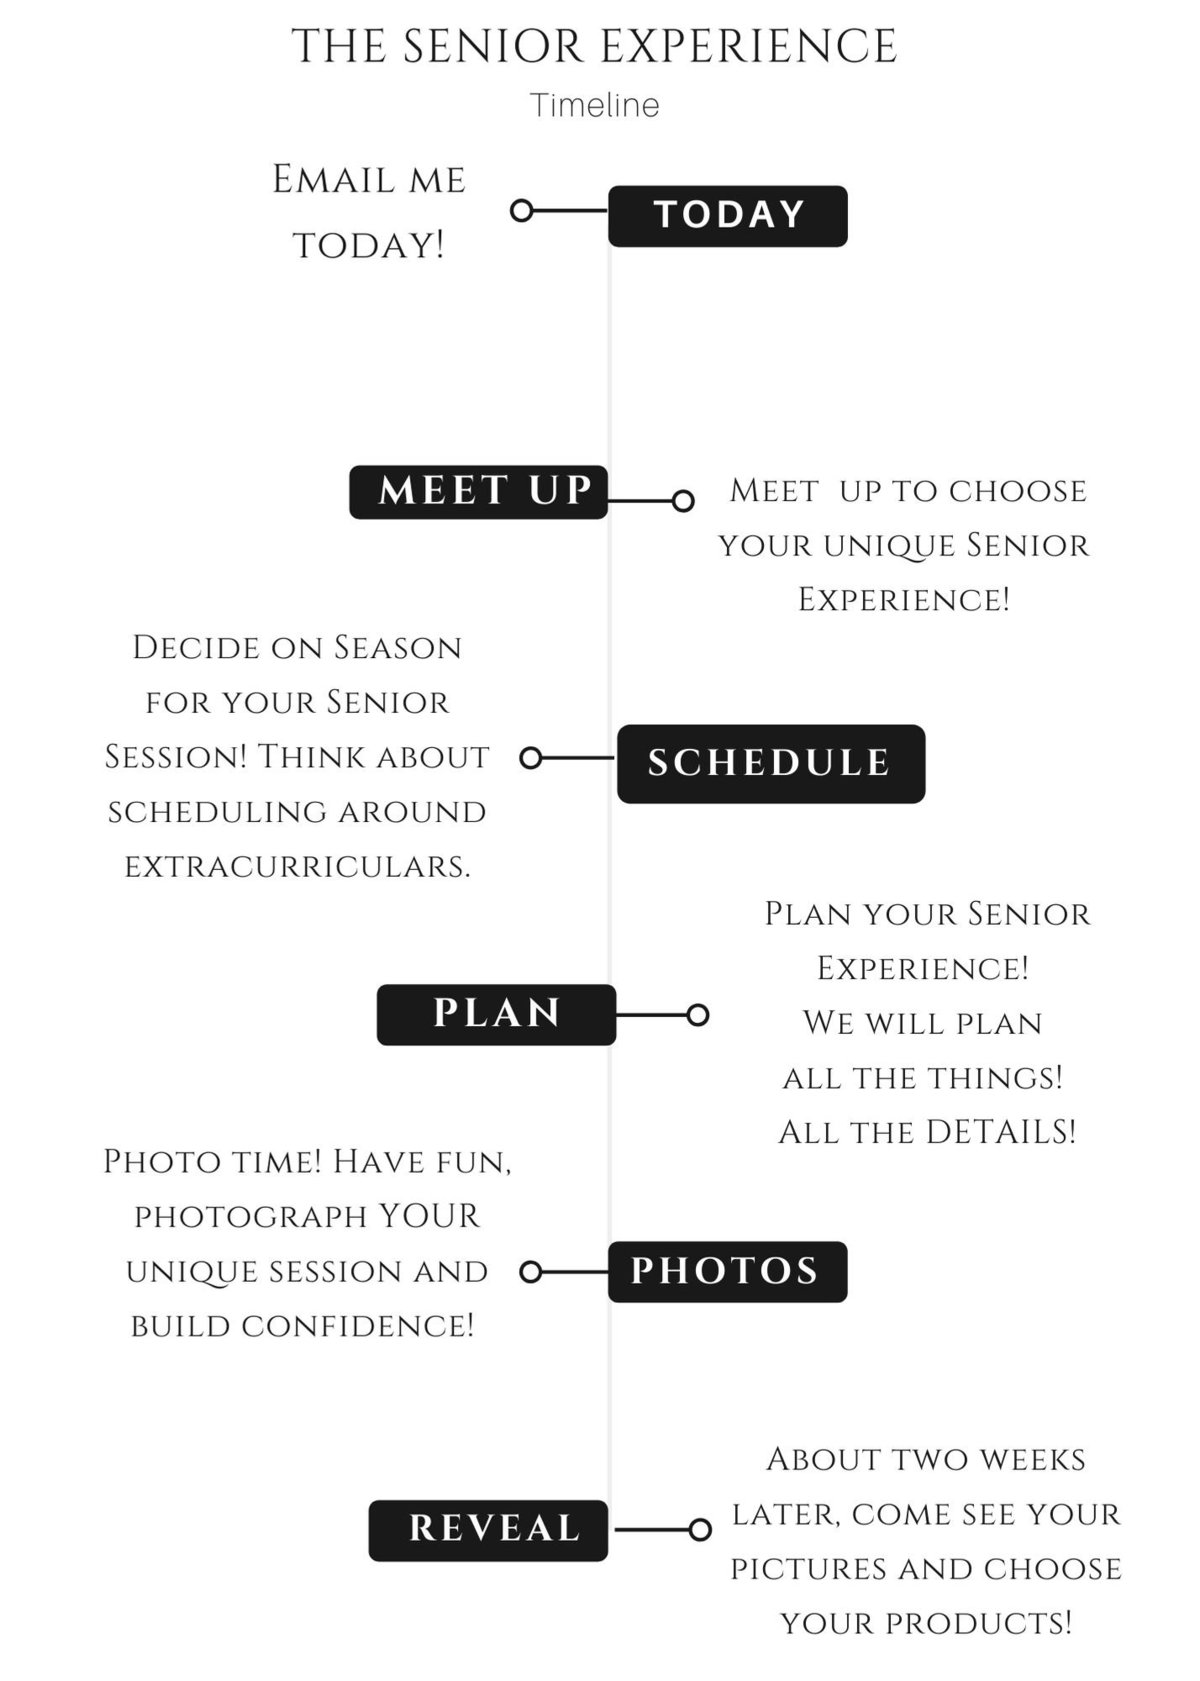 timeline showing the senior experience with jamie lynette photography